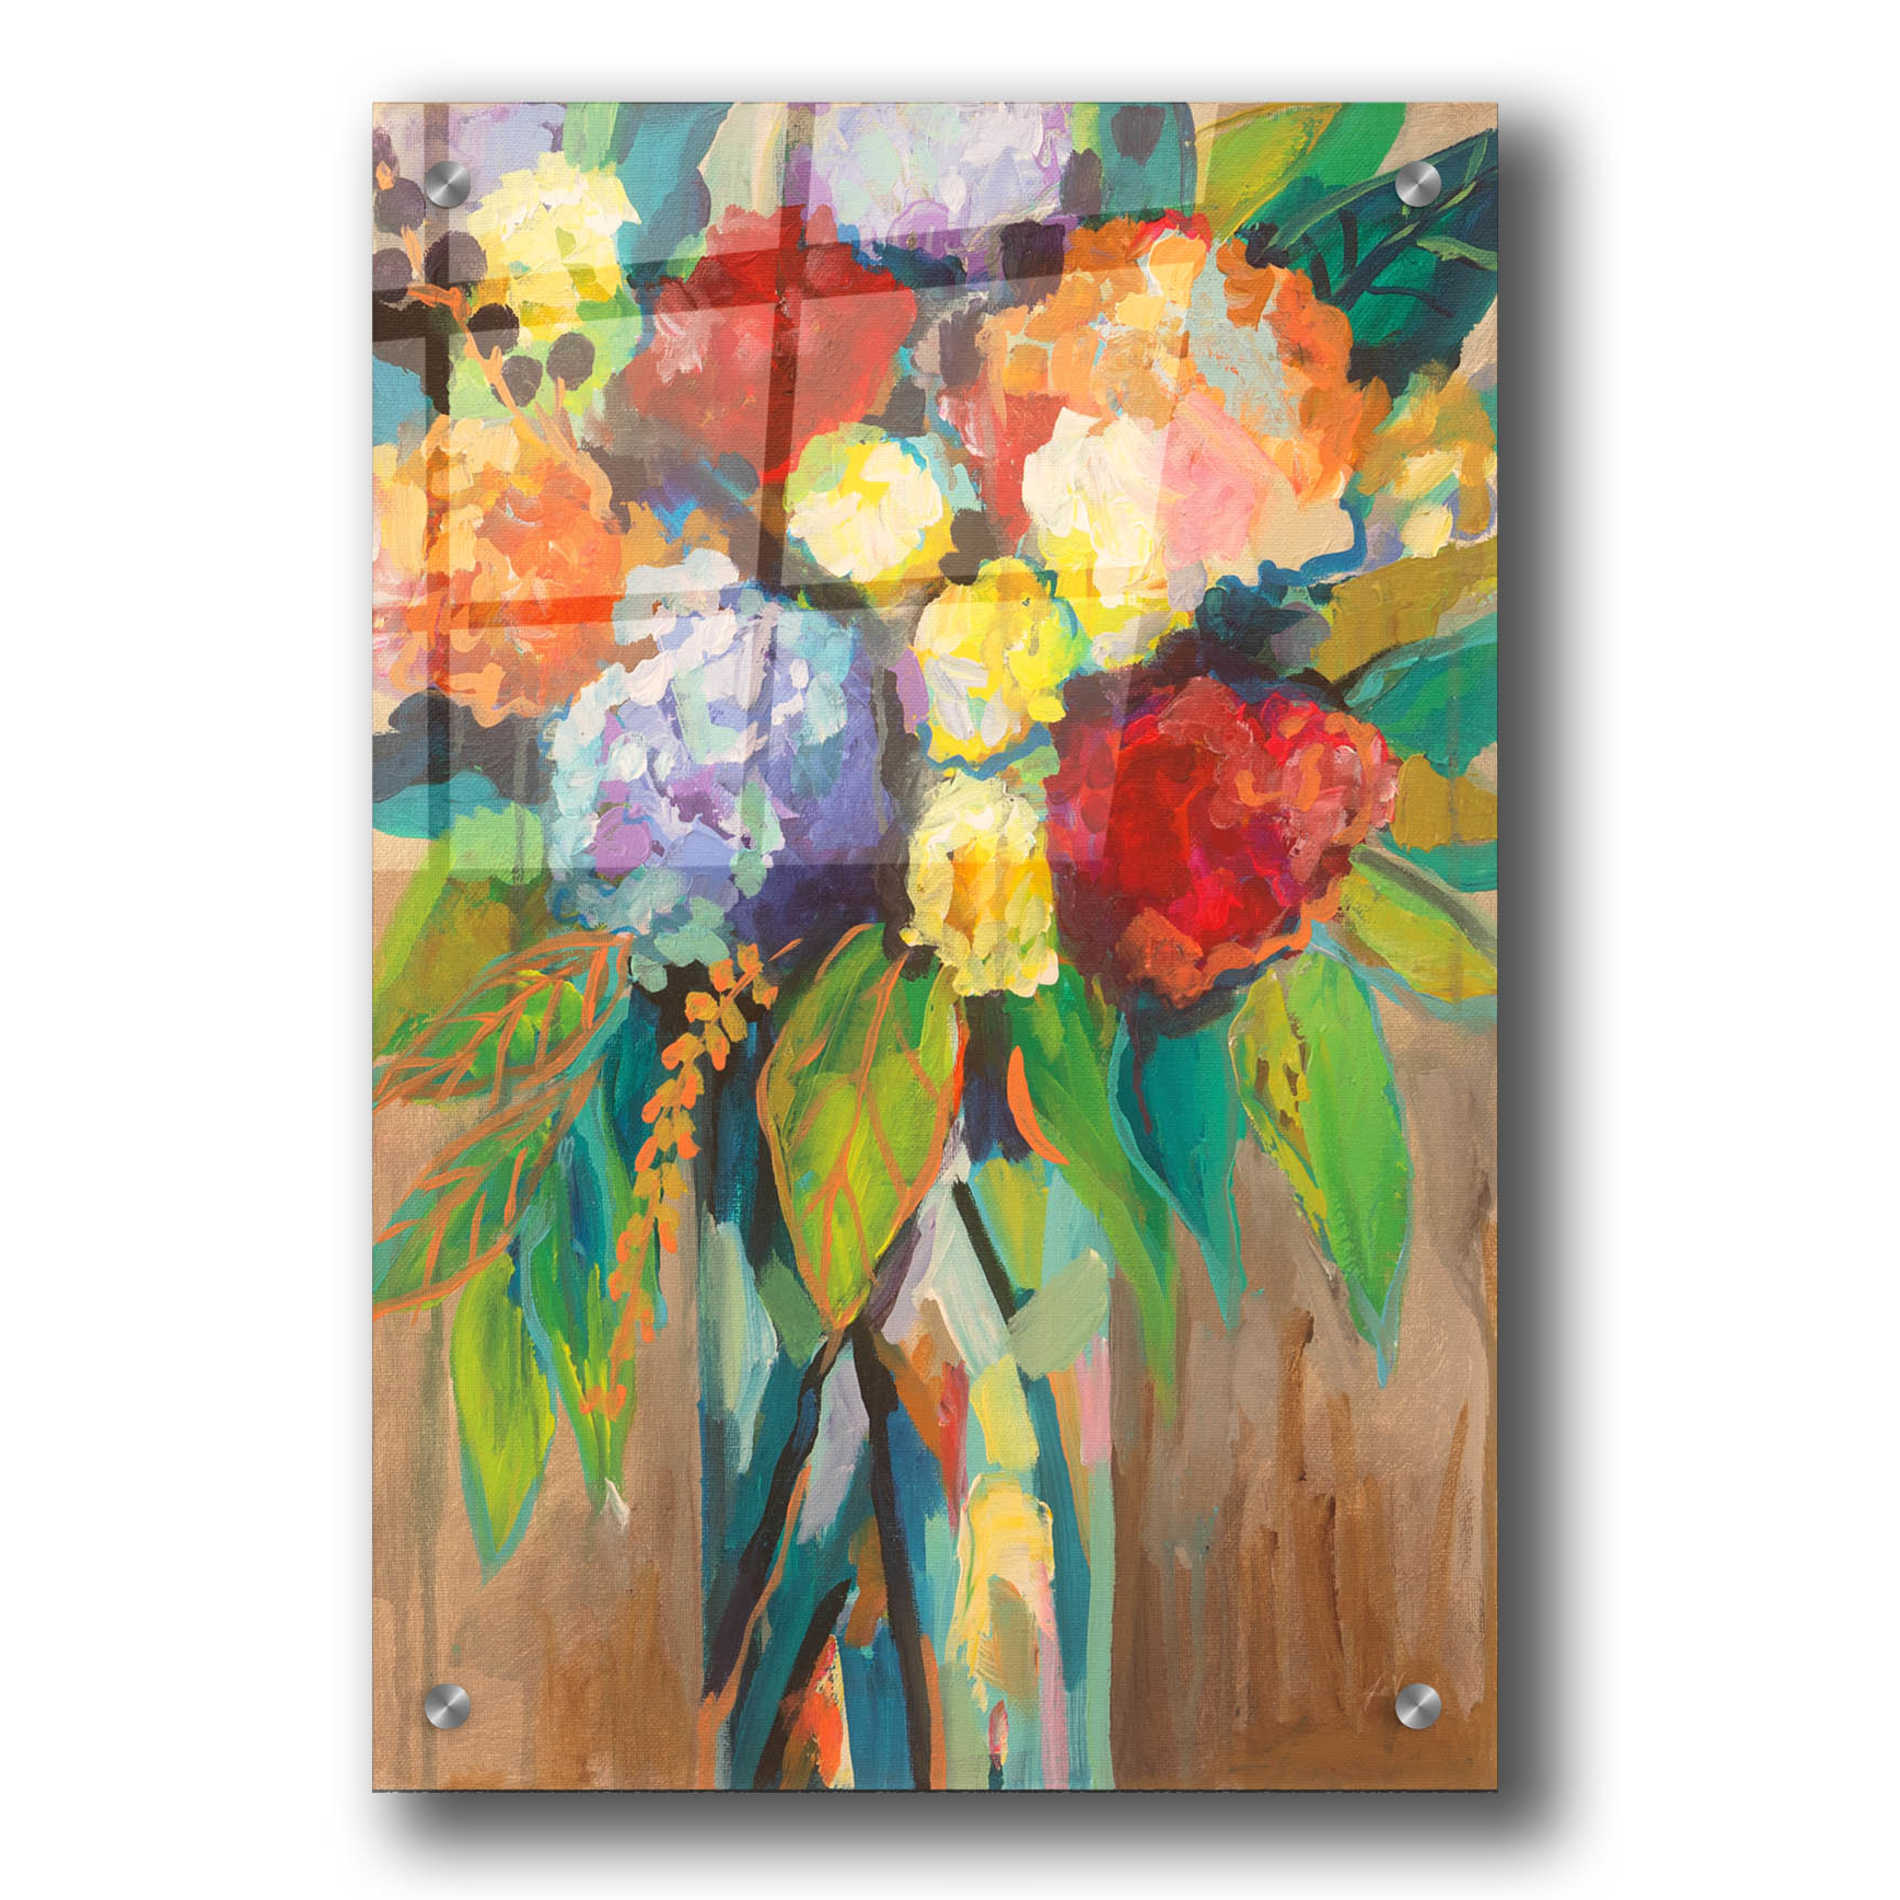 Epic Art 'Colorful' by Jeanette Vertentes, Acrylic Glass Wall Art,24x36